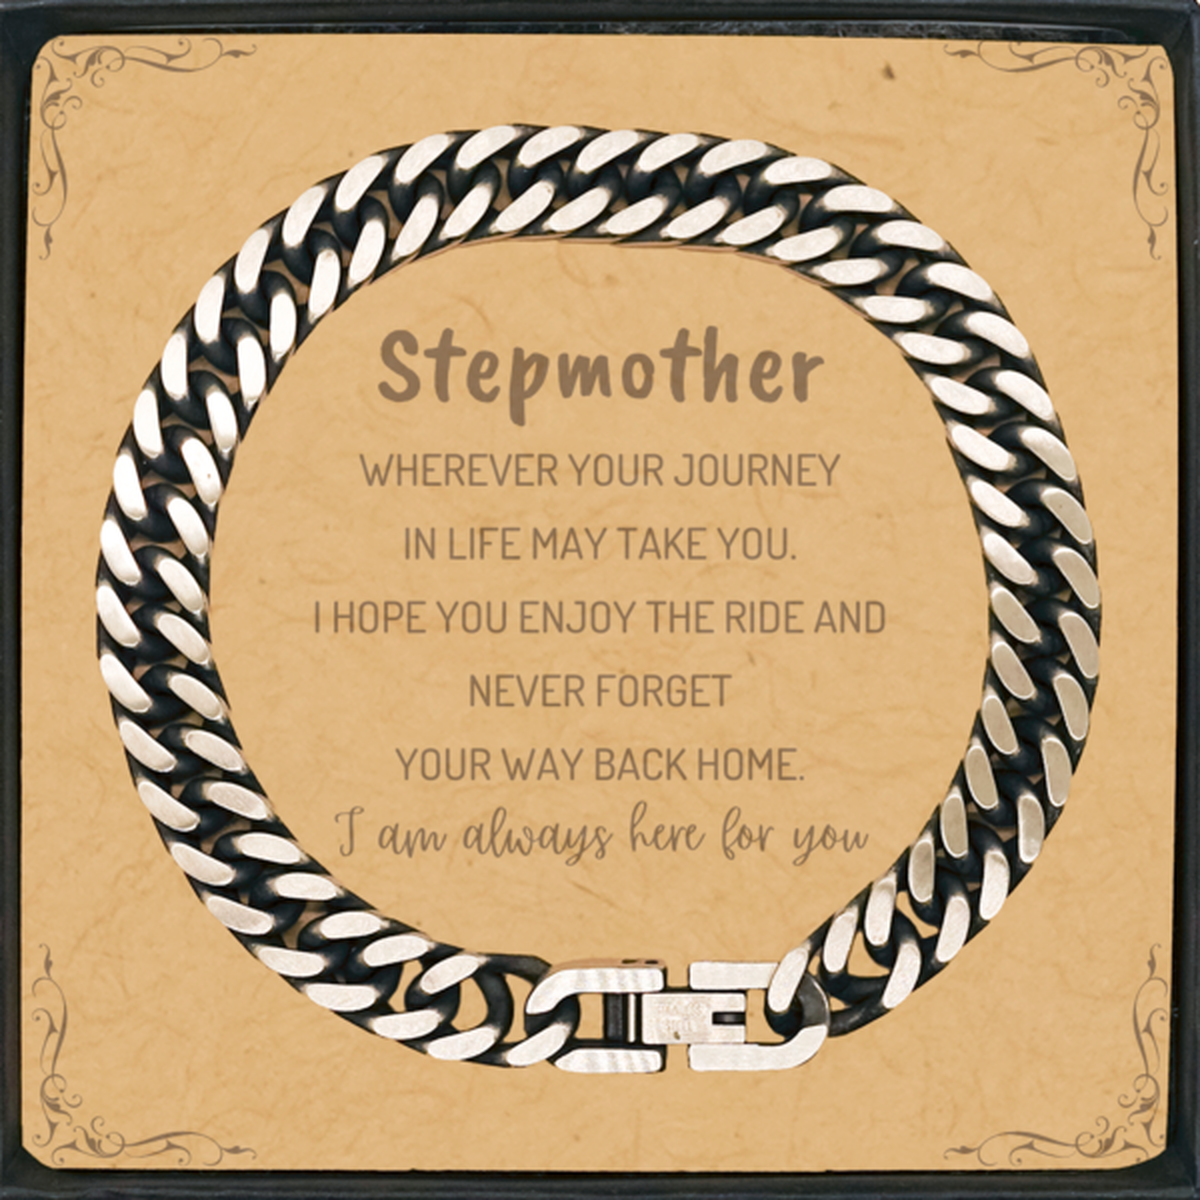 Stepmother wherever your journey in life may take you, I am always here for you Stepmother Cuban Link Chain Bracelet, Awesome Christmas Gifts For Stepmother Message Card, Stepmother Birthday Gifts for Men Women Family Loved One